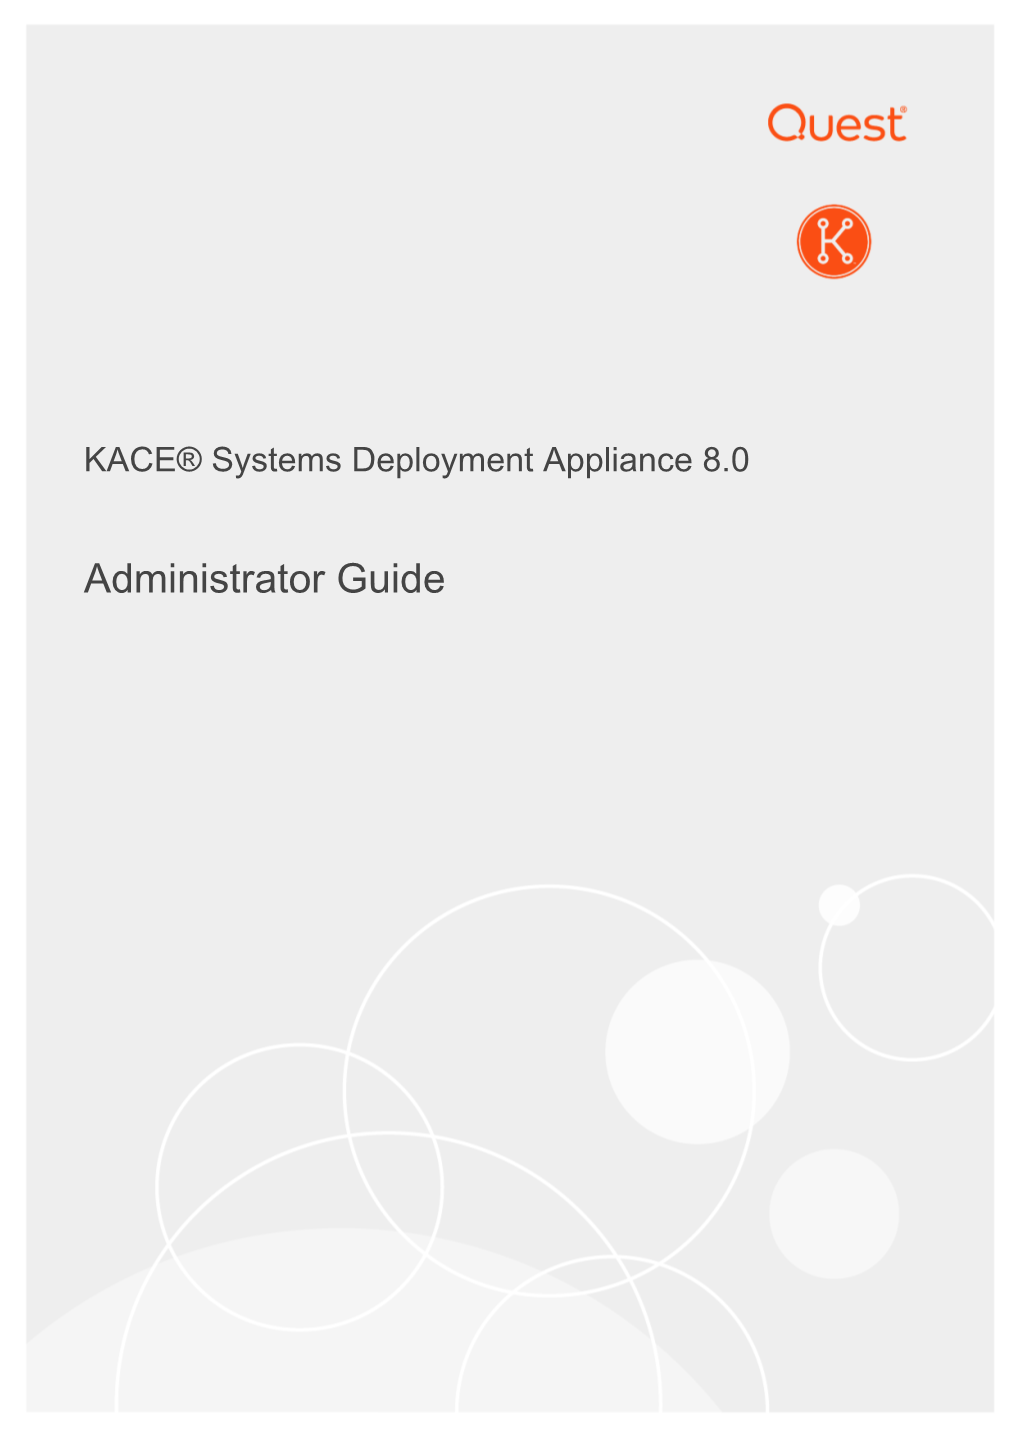 KACE® Systems Deployment Appliance 8.0 Administrator Guide